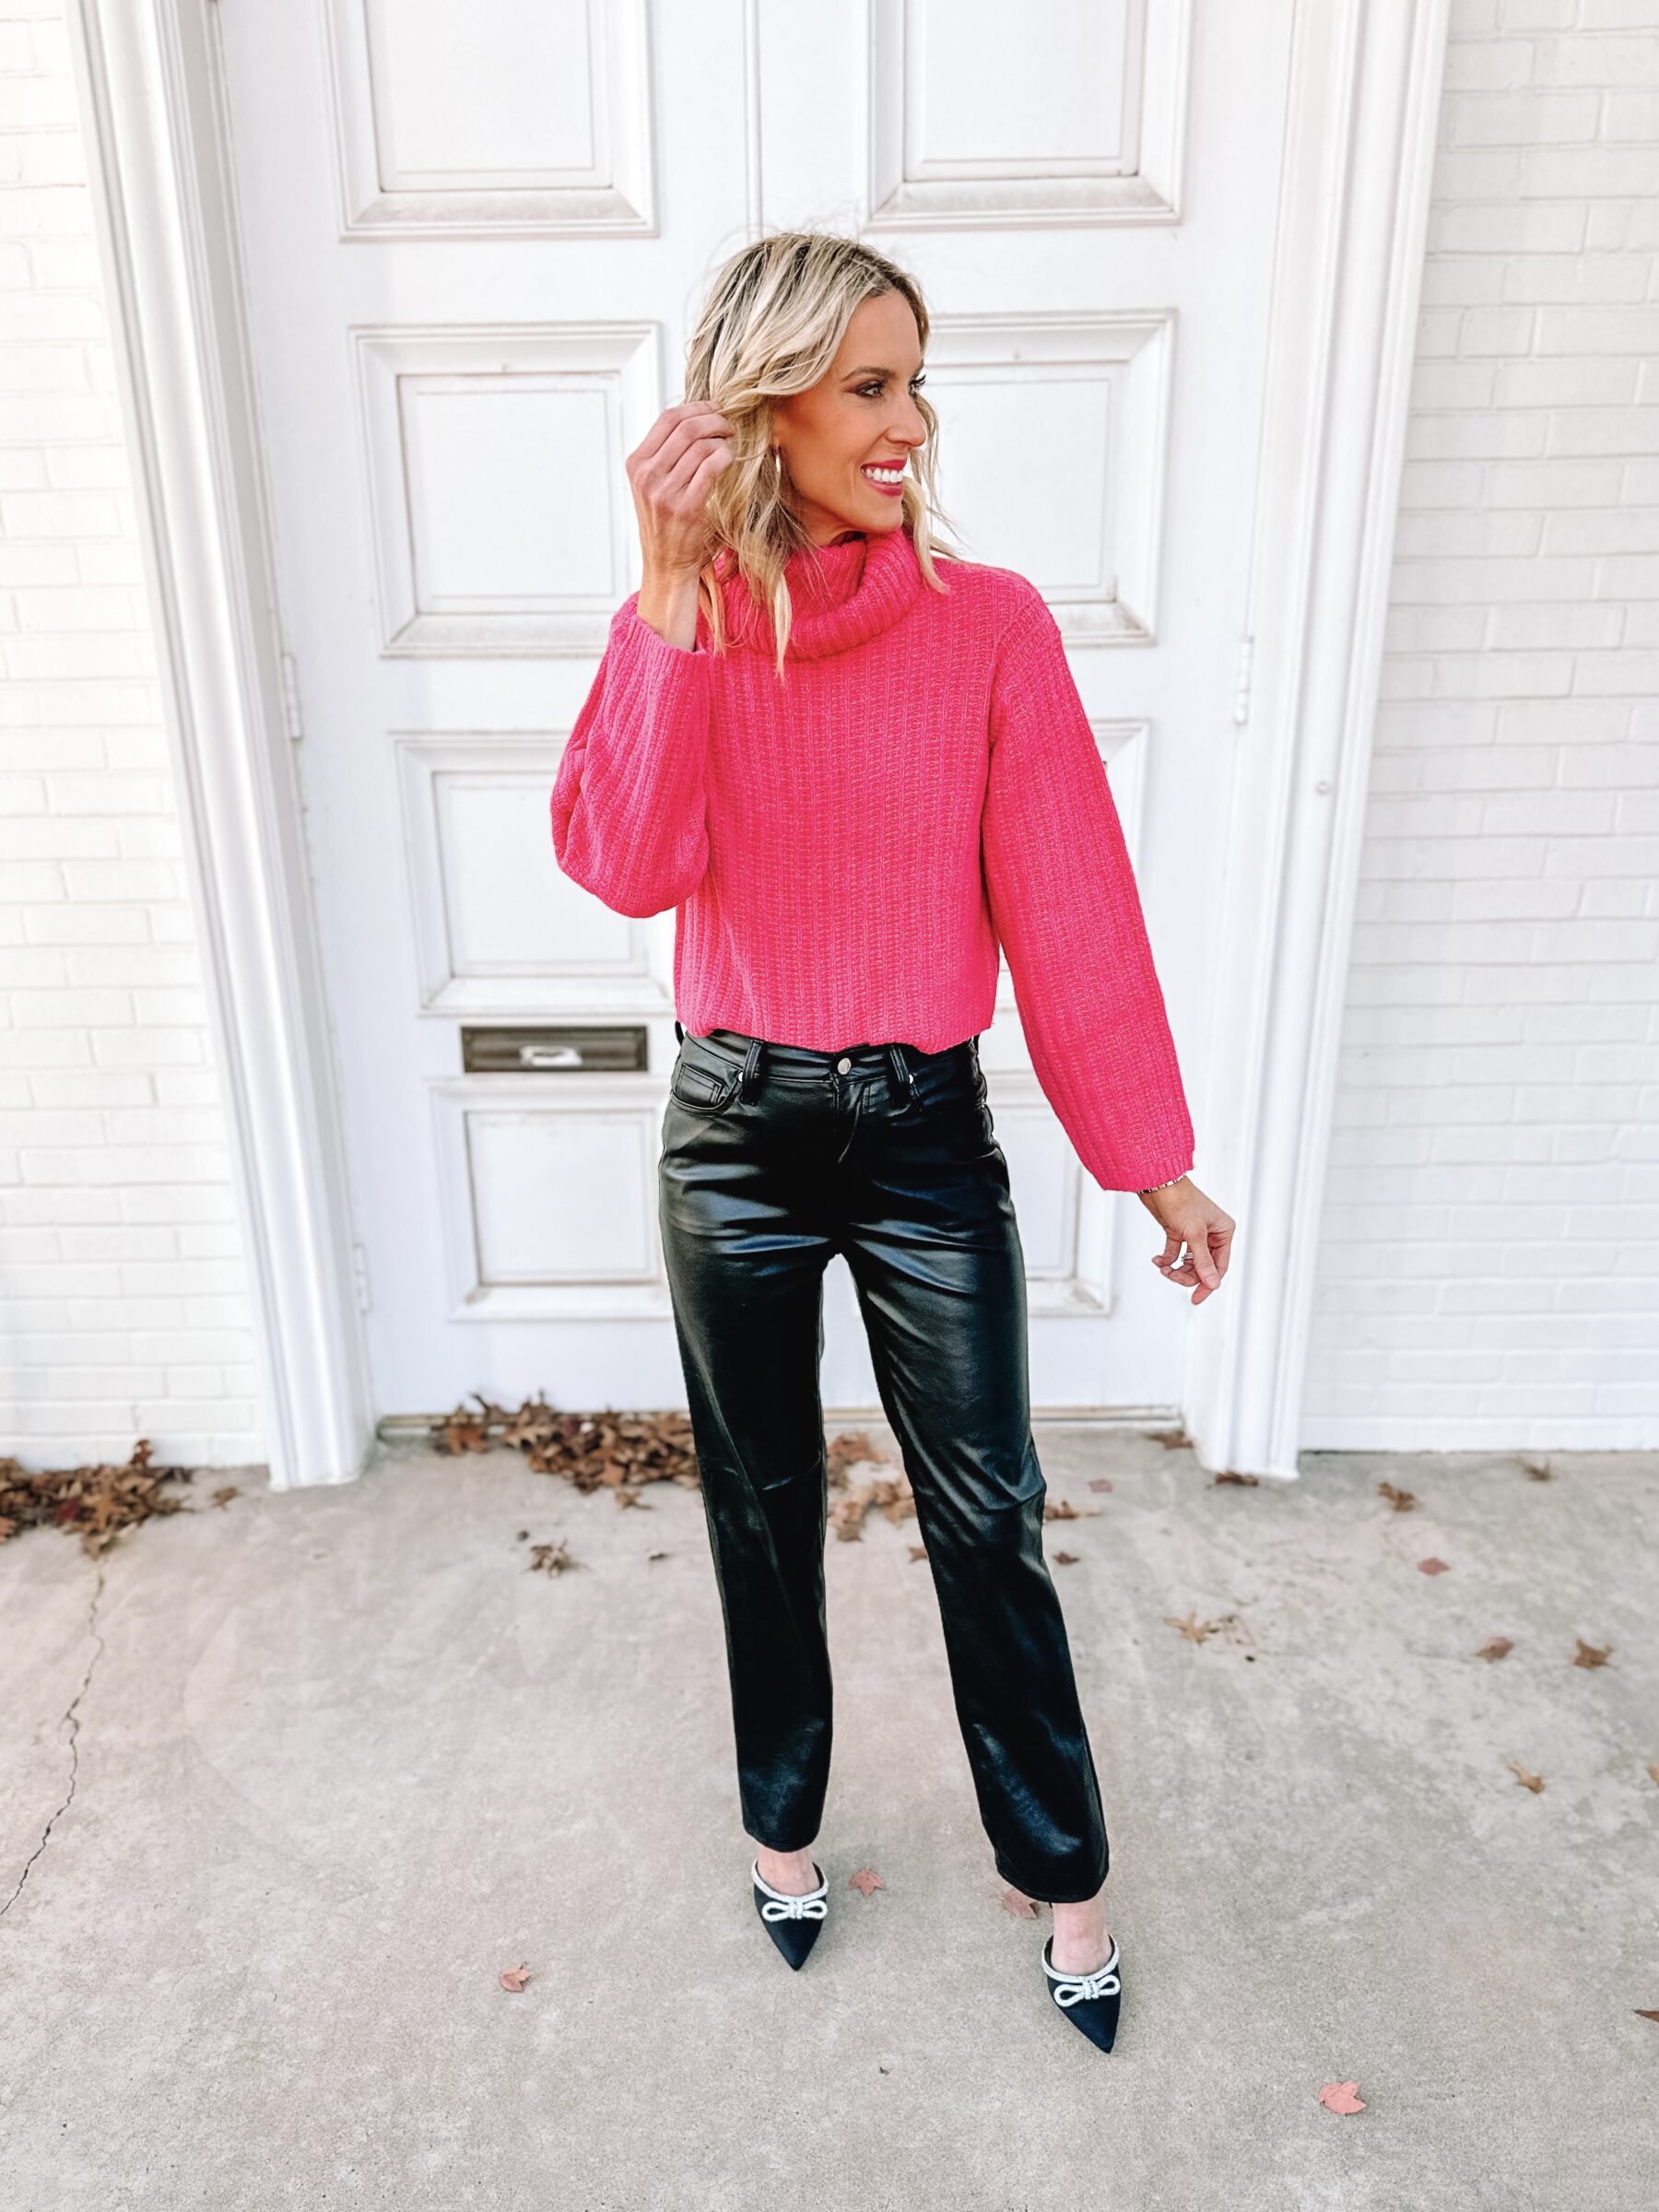 13 Leather Pants Outfits You Haven't Tried Yet